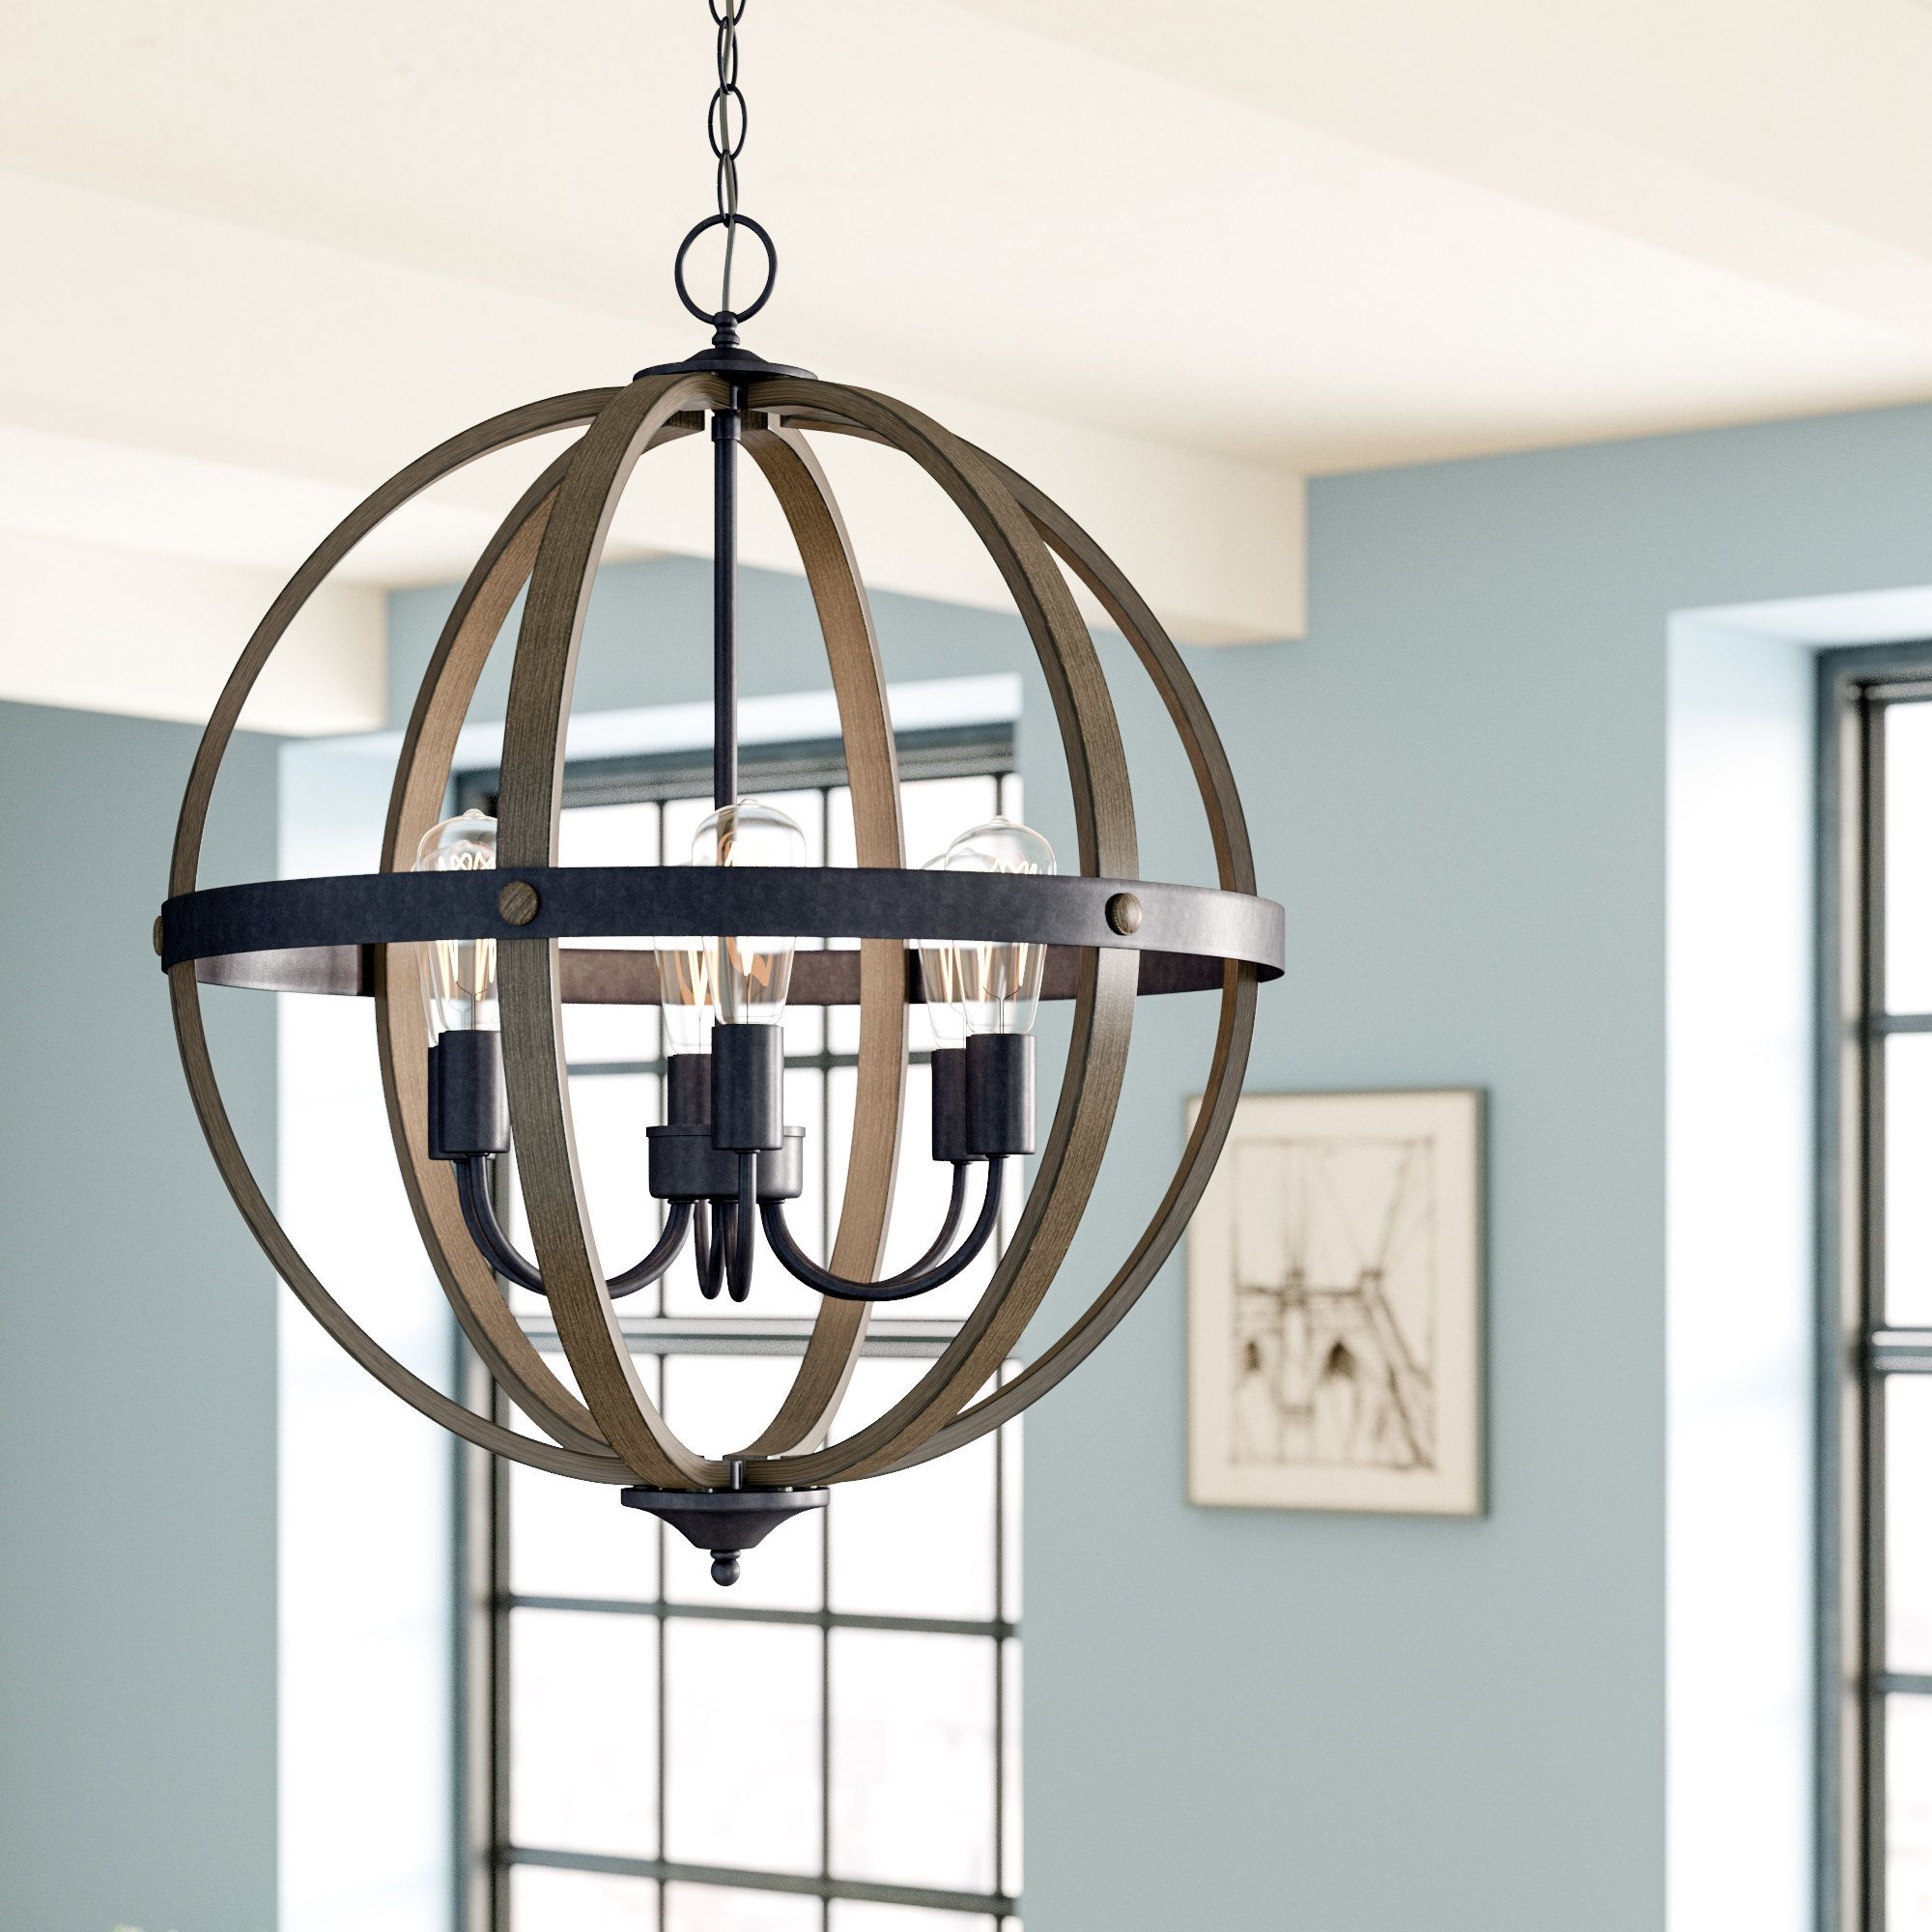 [%globe Chandeliers Sale – Up To 65% Off Until September 30th Pertaining To Preferred Waldron 5 Light Globe Chandeliers|waldron 5 Light Globe Chandeliers In Favorite Globe Chandeliers Sale – Up To 65% Off Until September 30th|preferred Waldron 5 Light Globe Chandeliers Inside Globe Chandeliers Sale – Up To 65% Off Until September 30th|well Known Globe Chandeliers Sale – Up To 65% Off Until September 30th For Waldron 5 Light Globe Chandeliers%] (View 22 of 25)